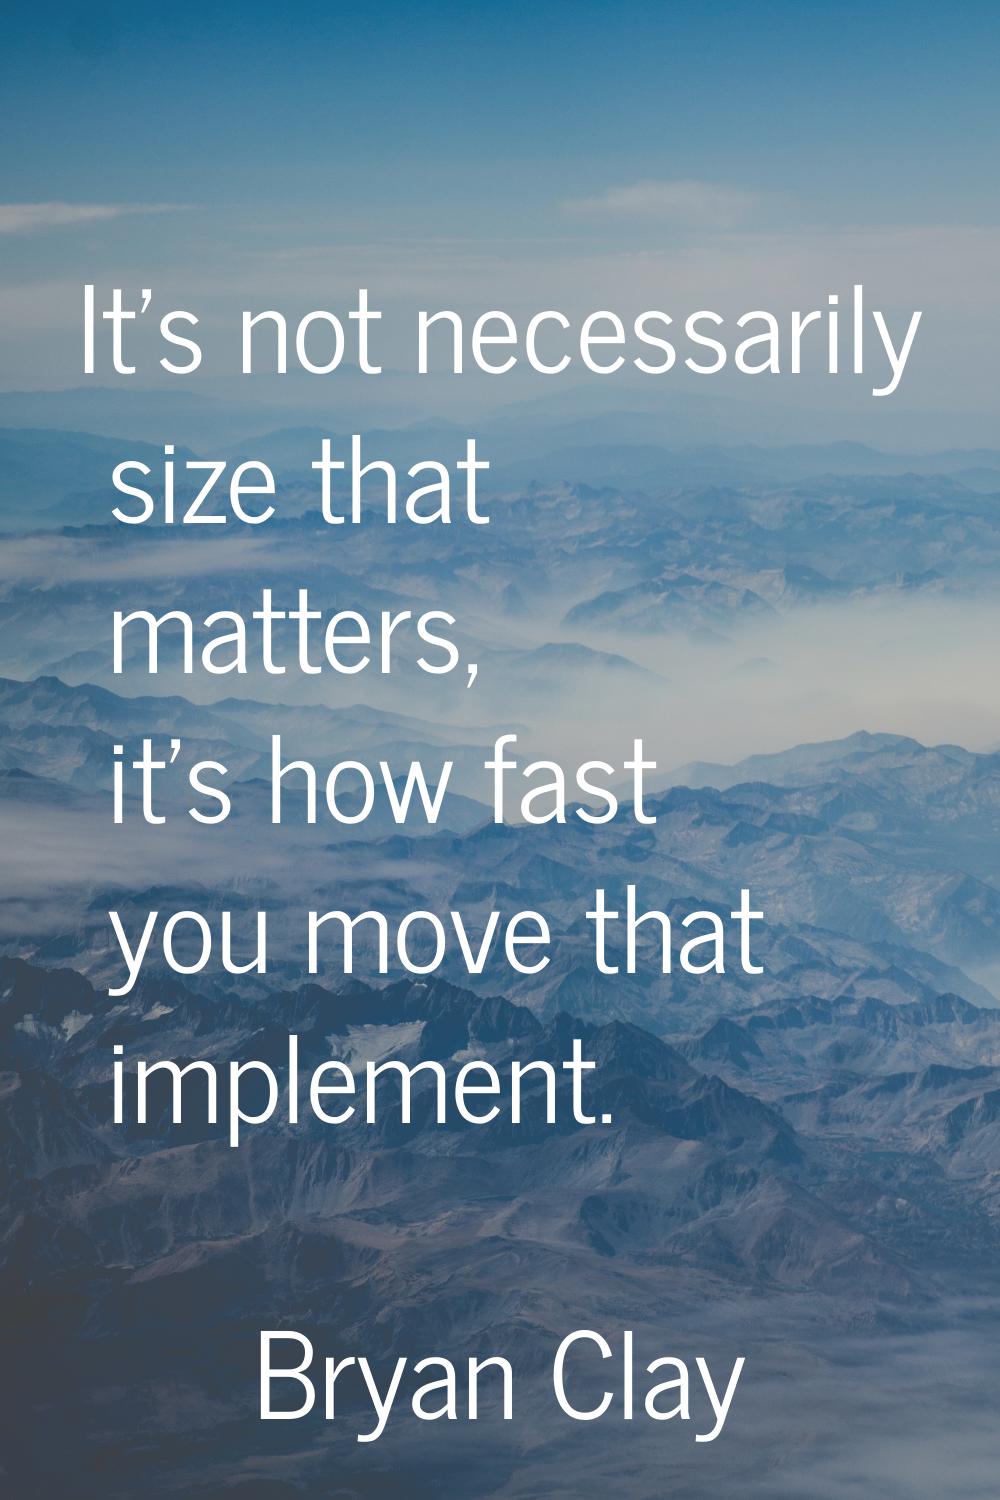 It's not necessarily size that matters, it's how fast you move that implement.